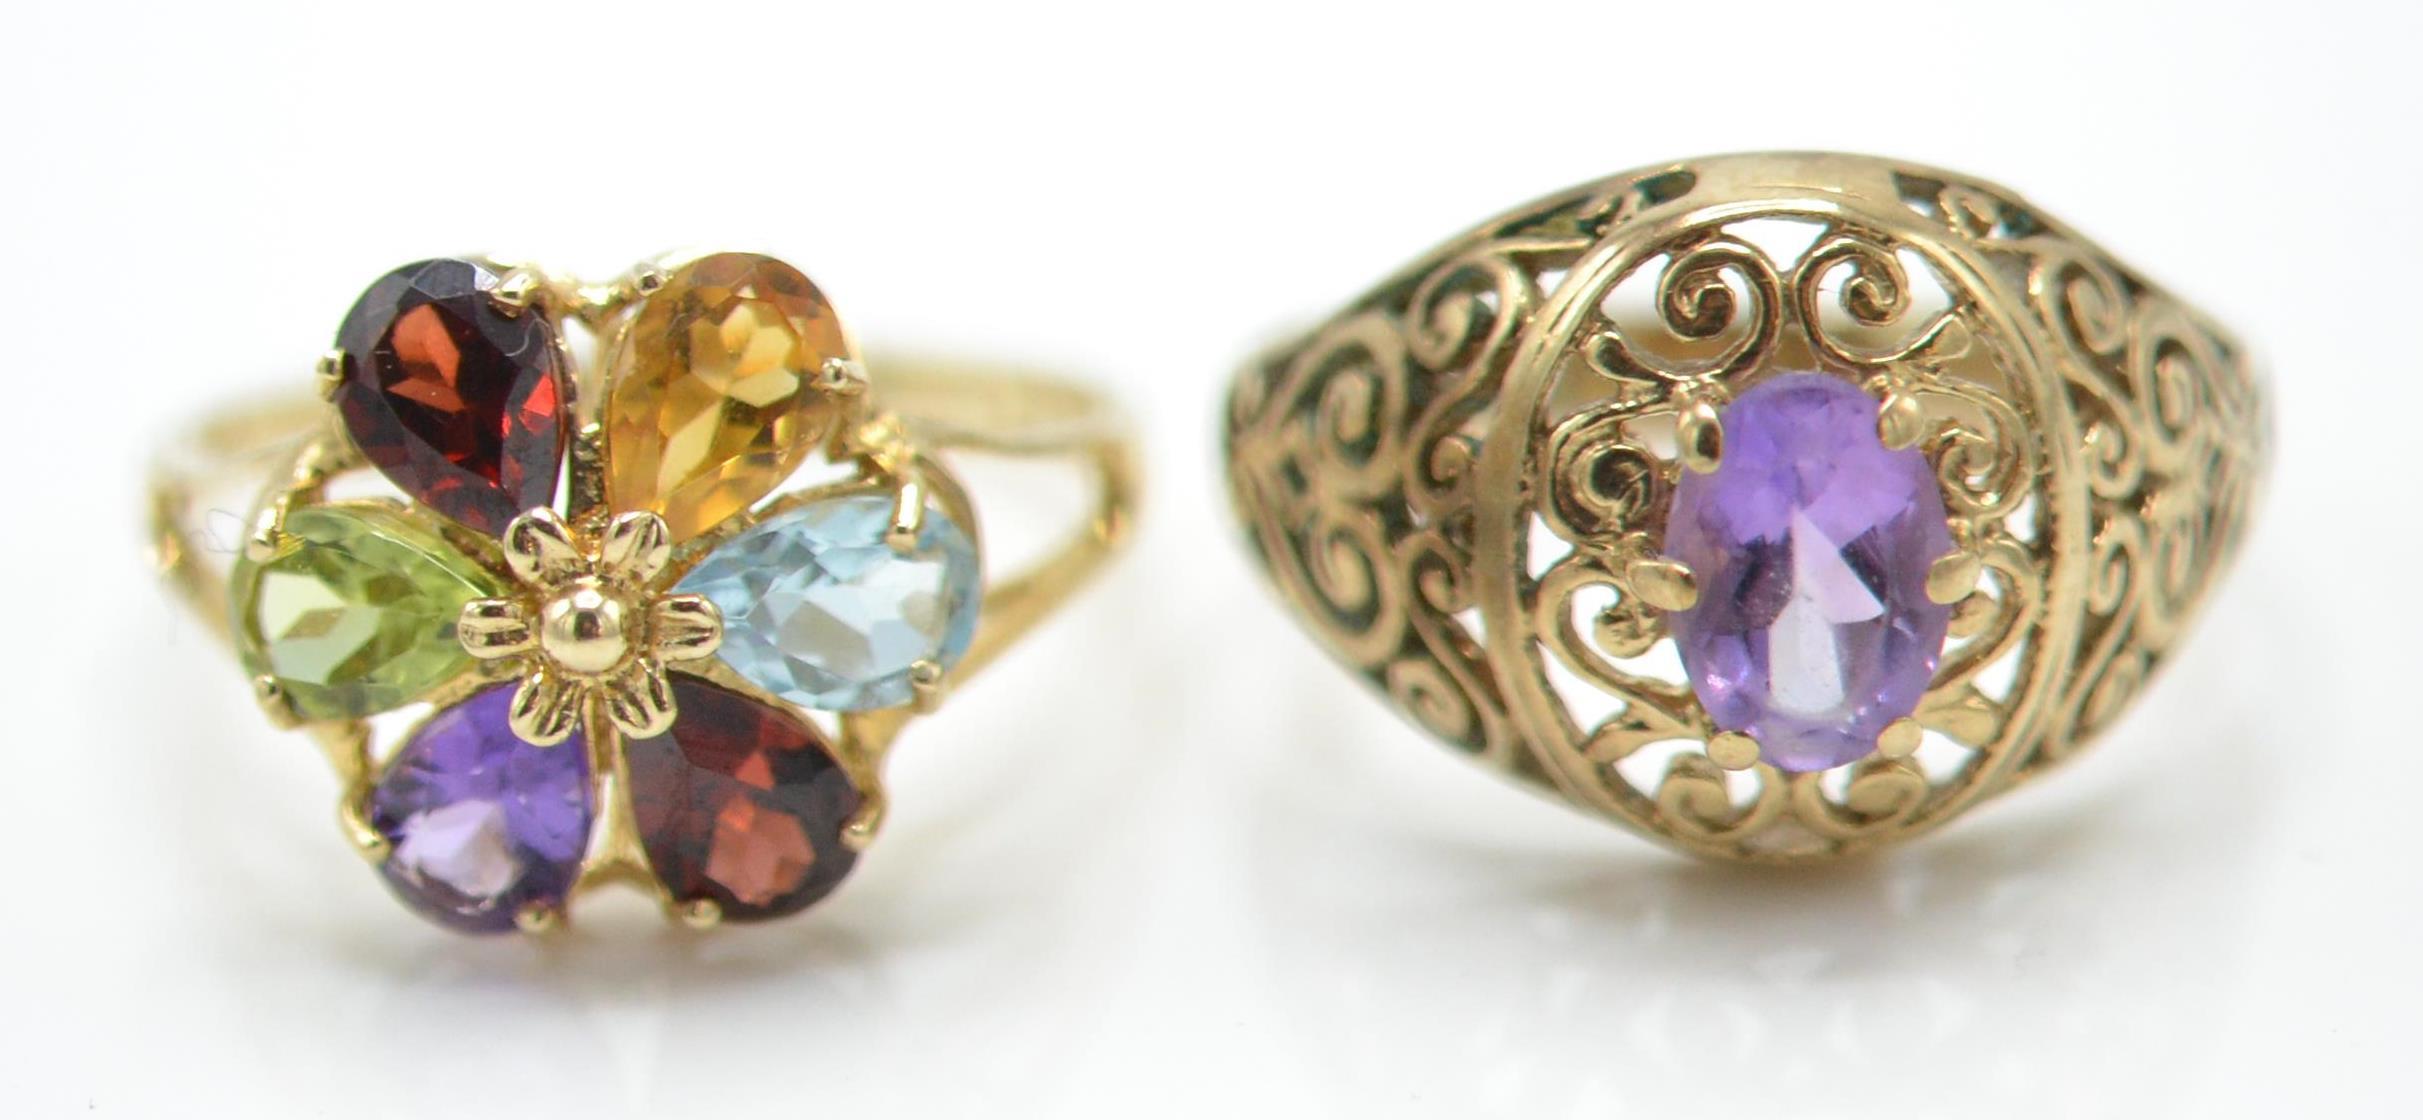 2 hallmarked 9ct gold and gem set rings. One having a gem set cluster, the other having an